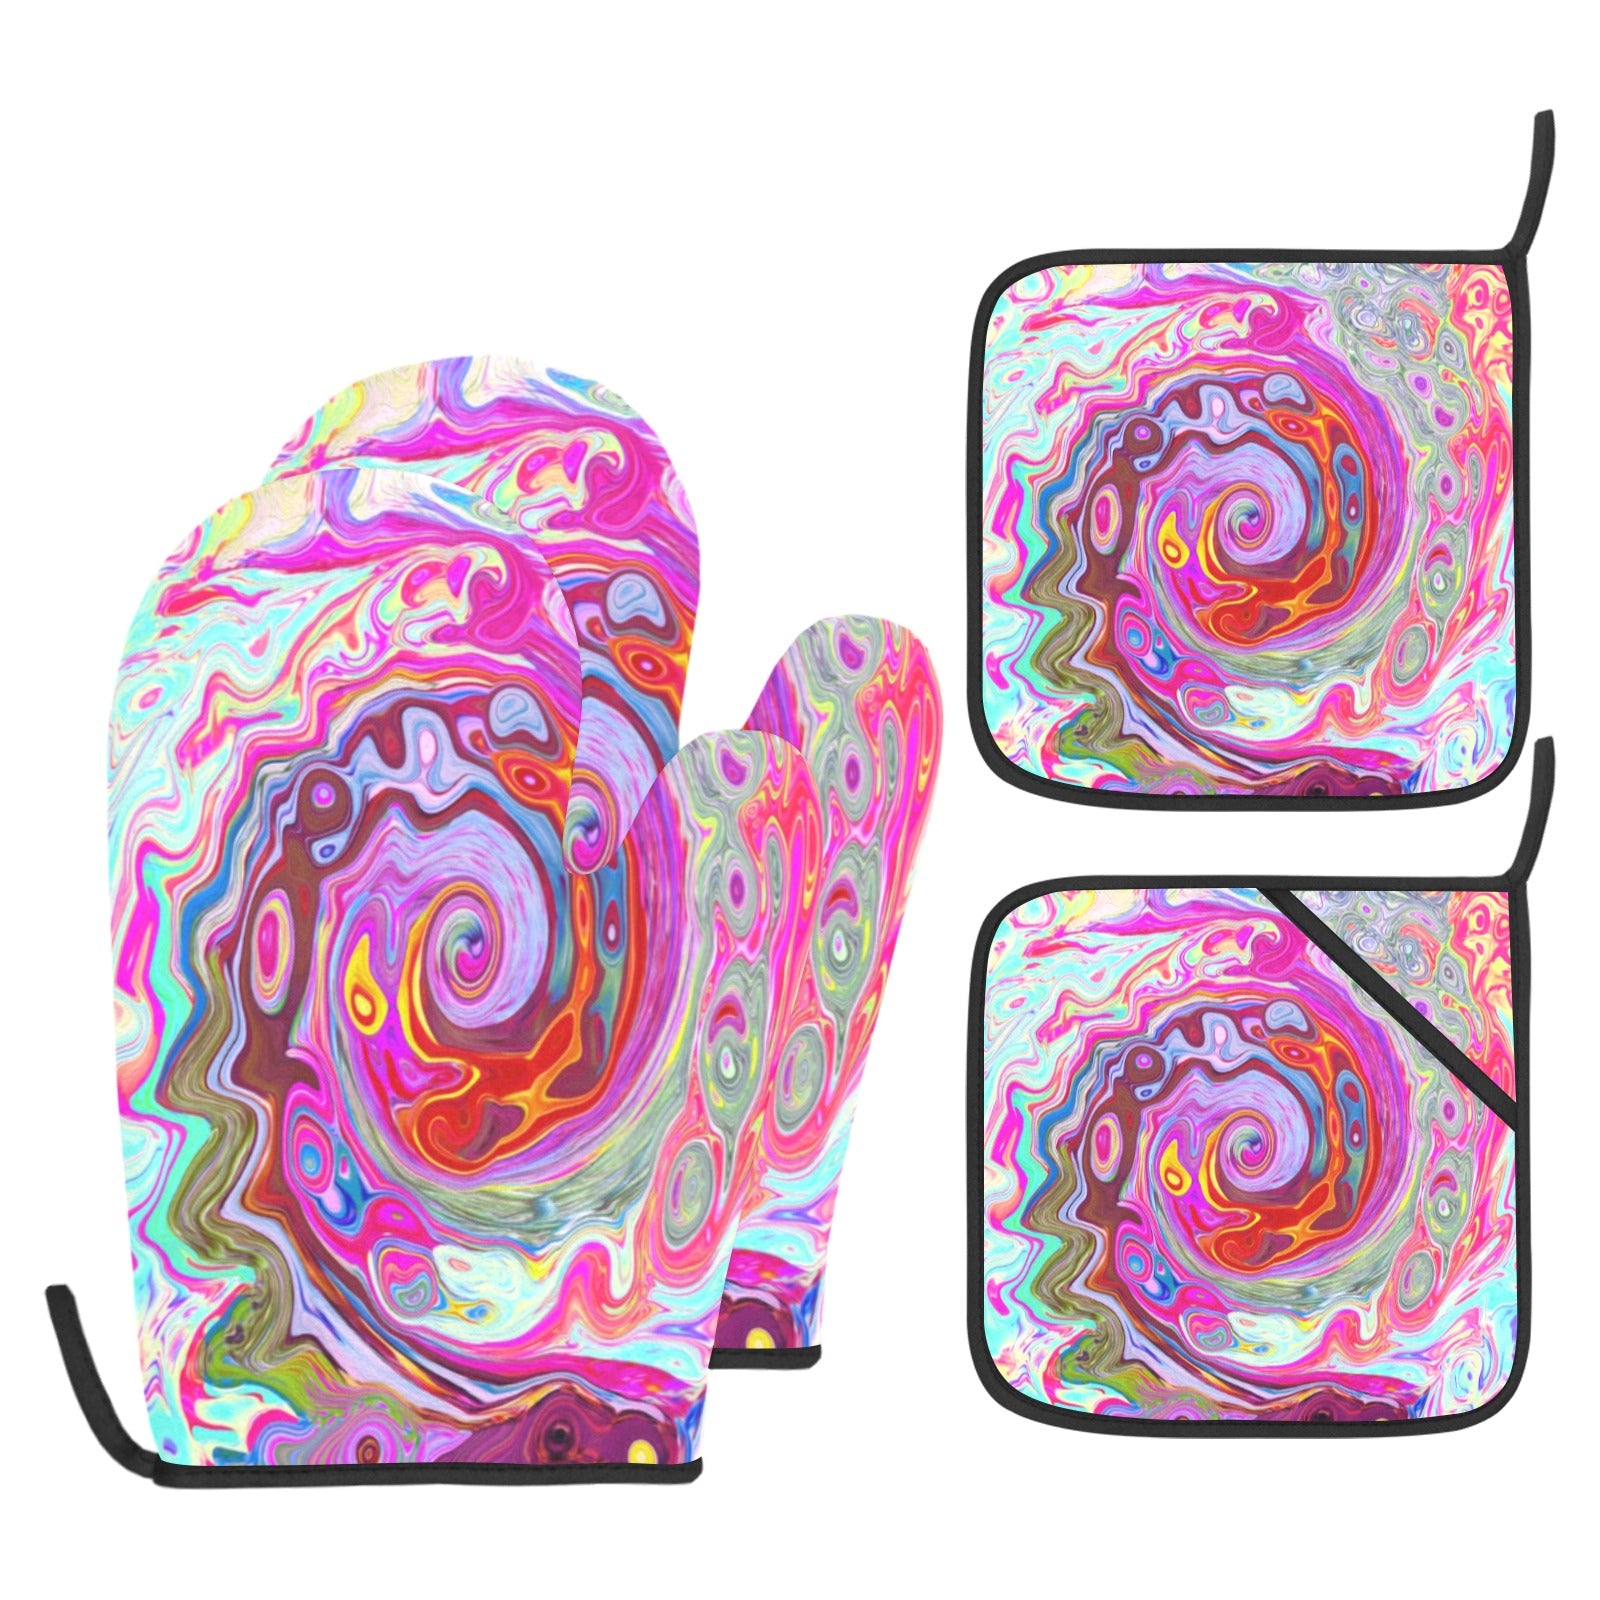 Oven Mitts with Pot Holders Set, Groovy Abstract Retro Hot Pink and Blue Swirl